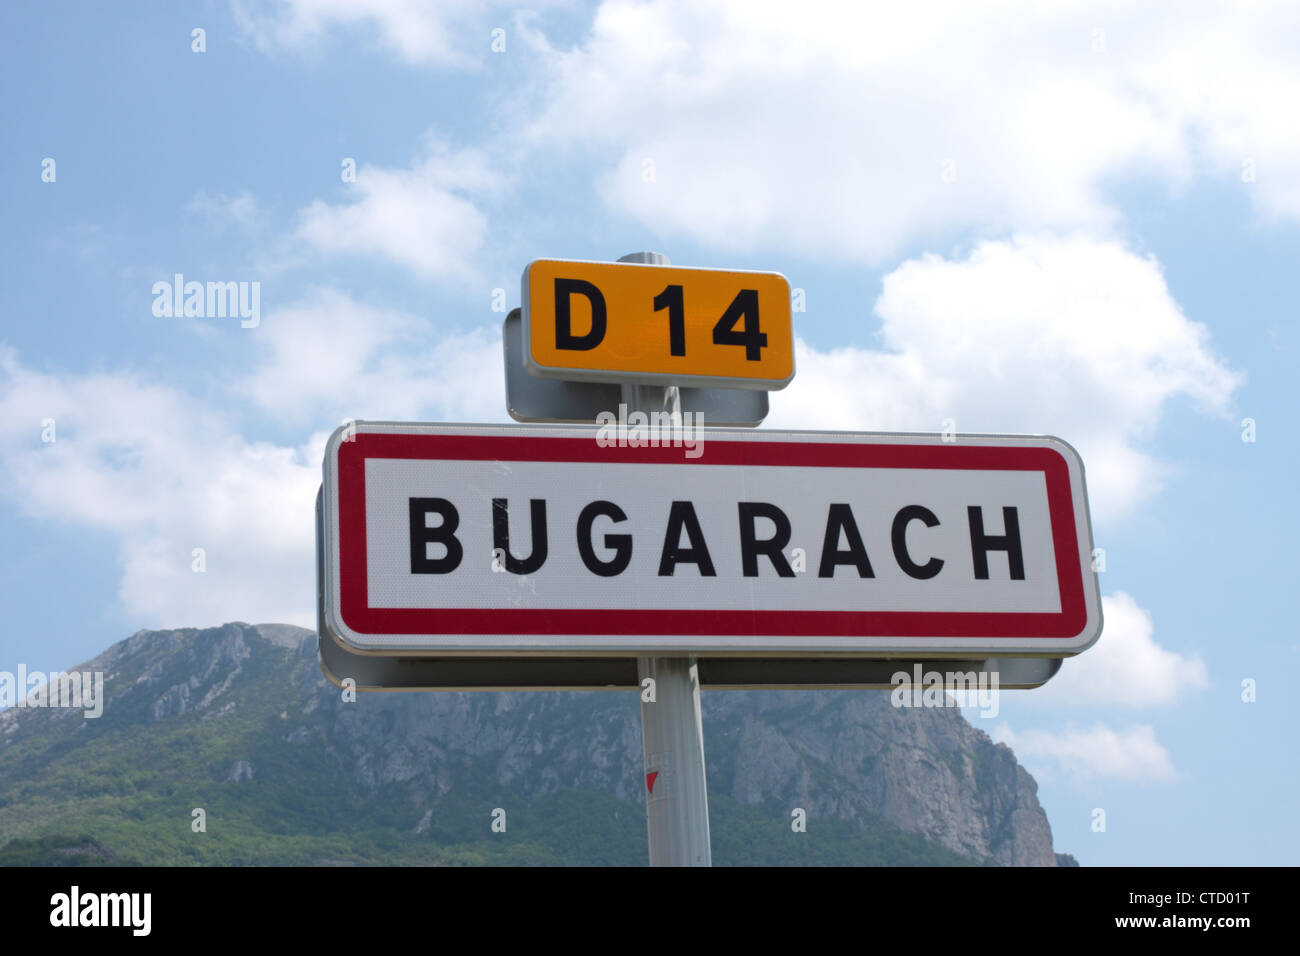 The village of Bugarach Aude France with Pic de Bugarach in the background Stock Photo